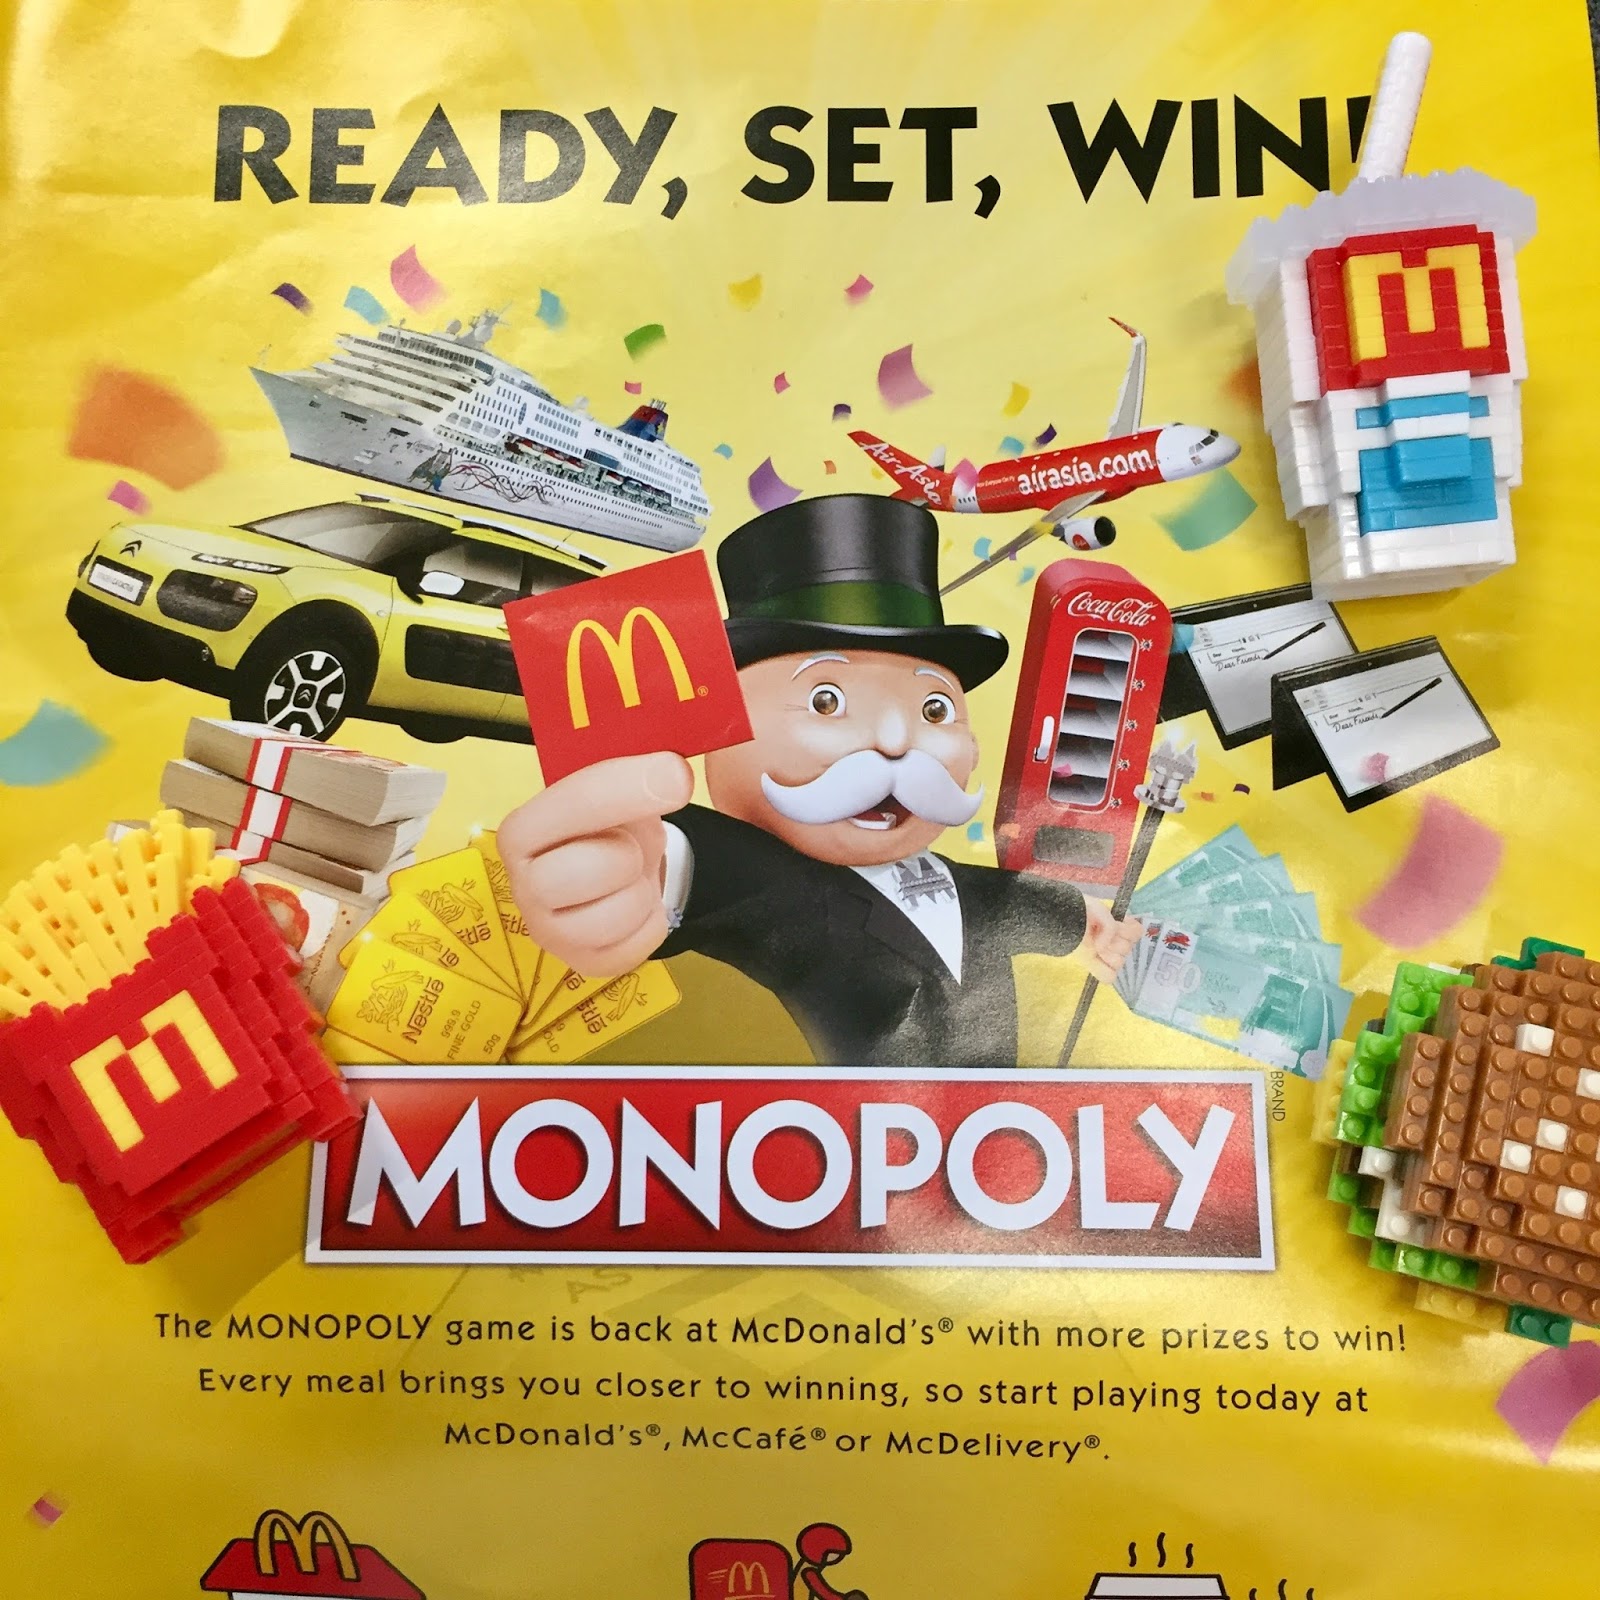 McDonald's Monopoly Is Back with Bigger Prizes! CAMEMBERU